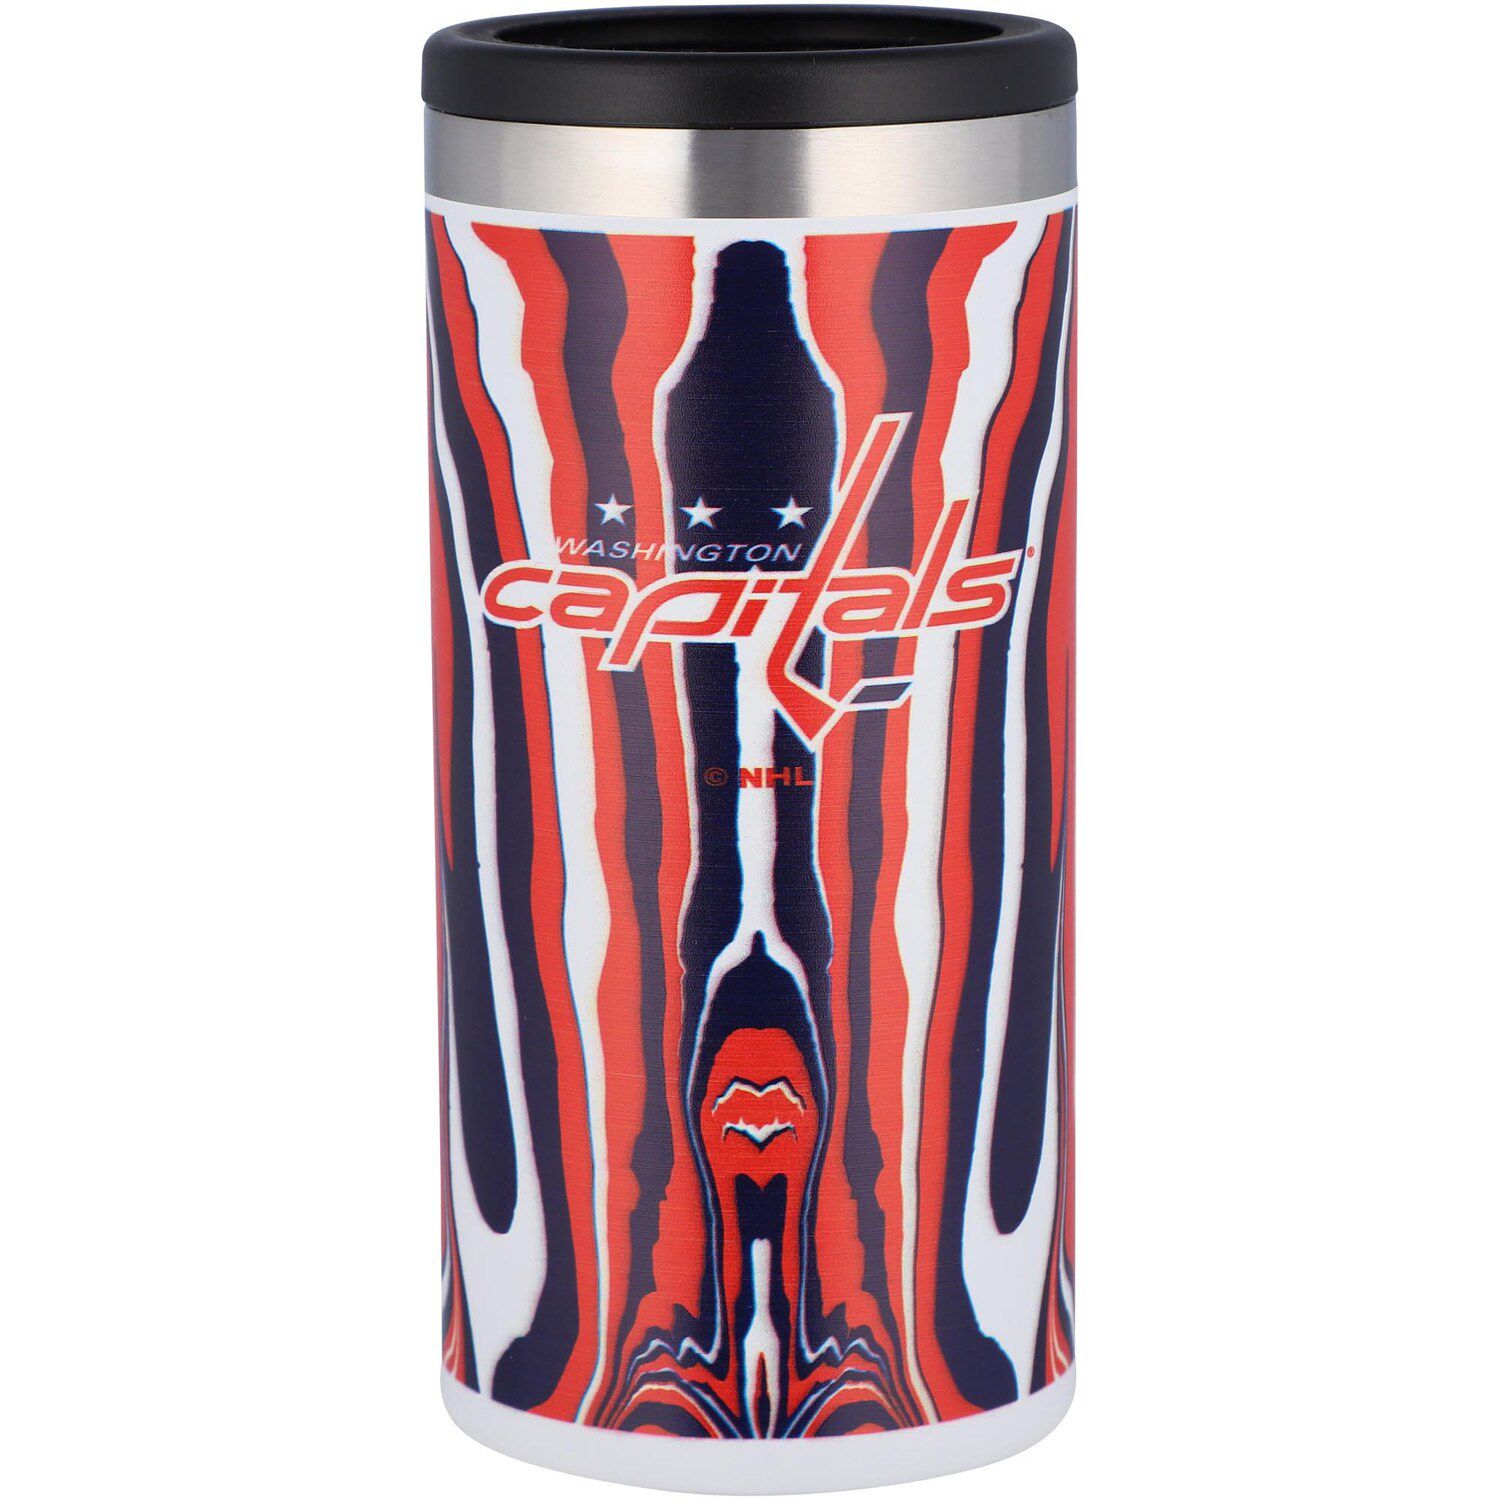 Image for Unbranded Washington Capitals 12oz. Tie-Dye Slim Can Holder at Kohl's.